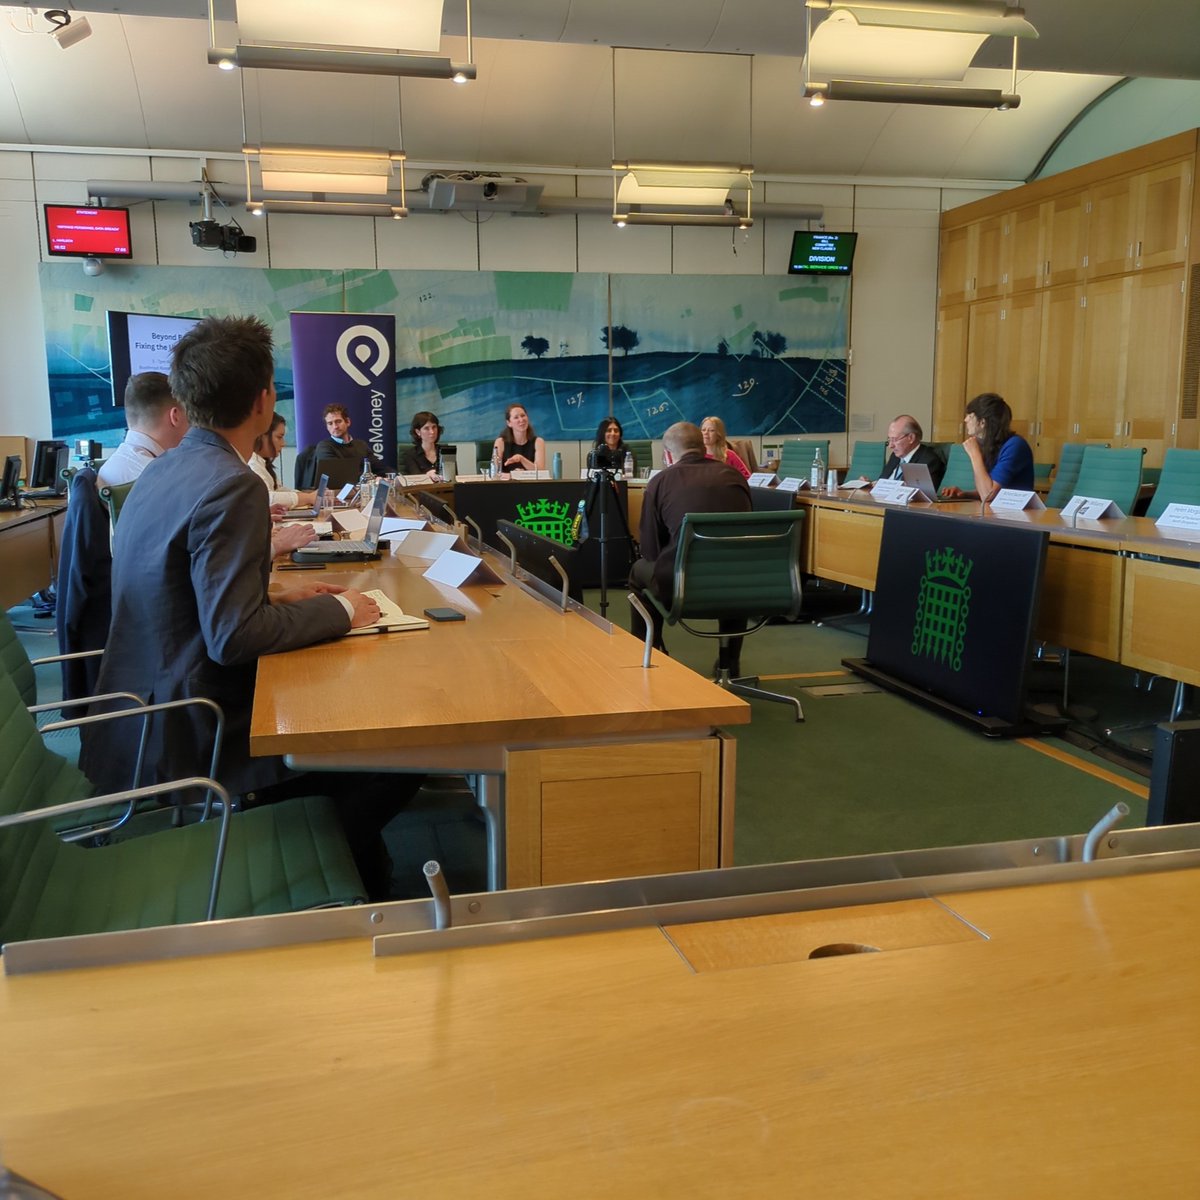 🧵 We're starting! Our housing event 'Beyond Building, Fixing the Housing Crisis' is beginning in parliament. We'll be hearing from @sianberry, @beth_stratford, @jryancollins and many others on solutions to the housing crisis Join the conversation using #PositiveMoneyLive